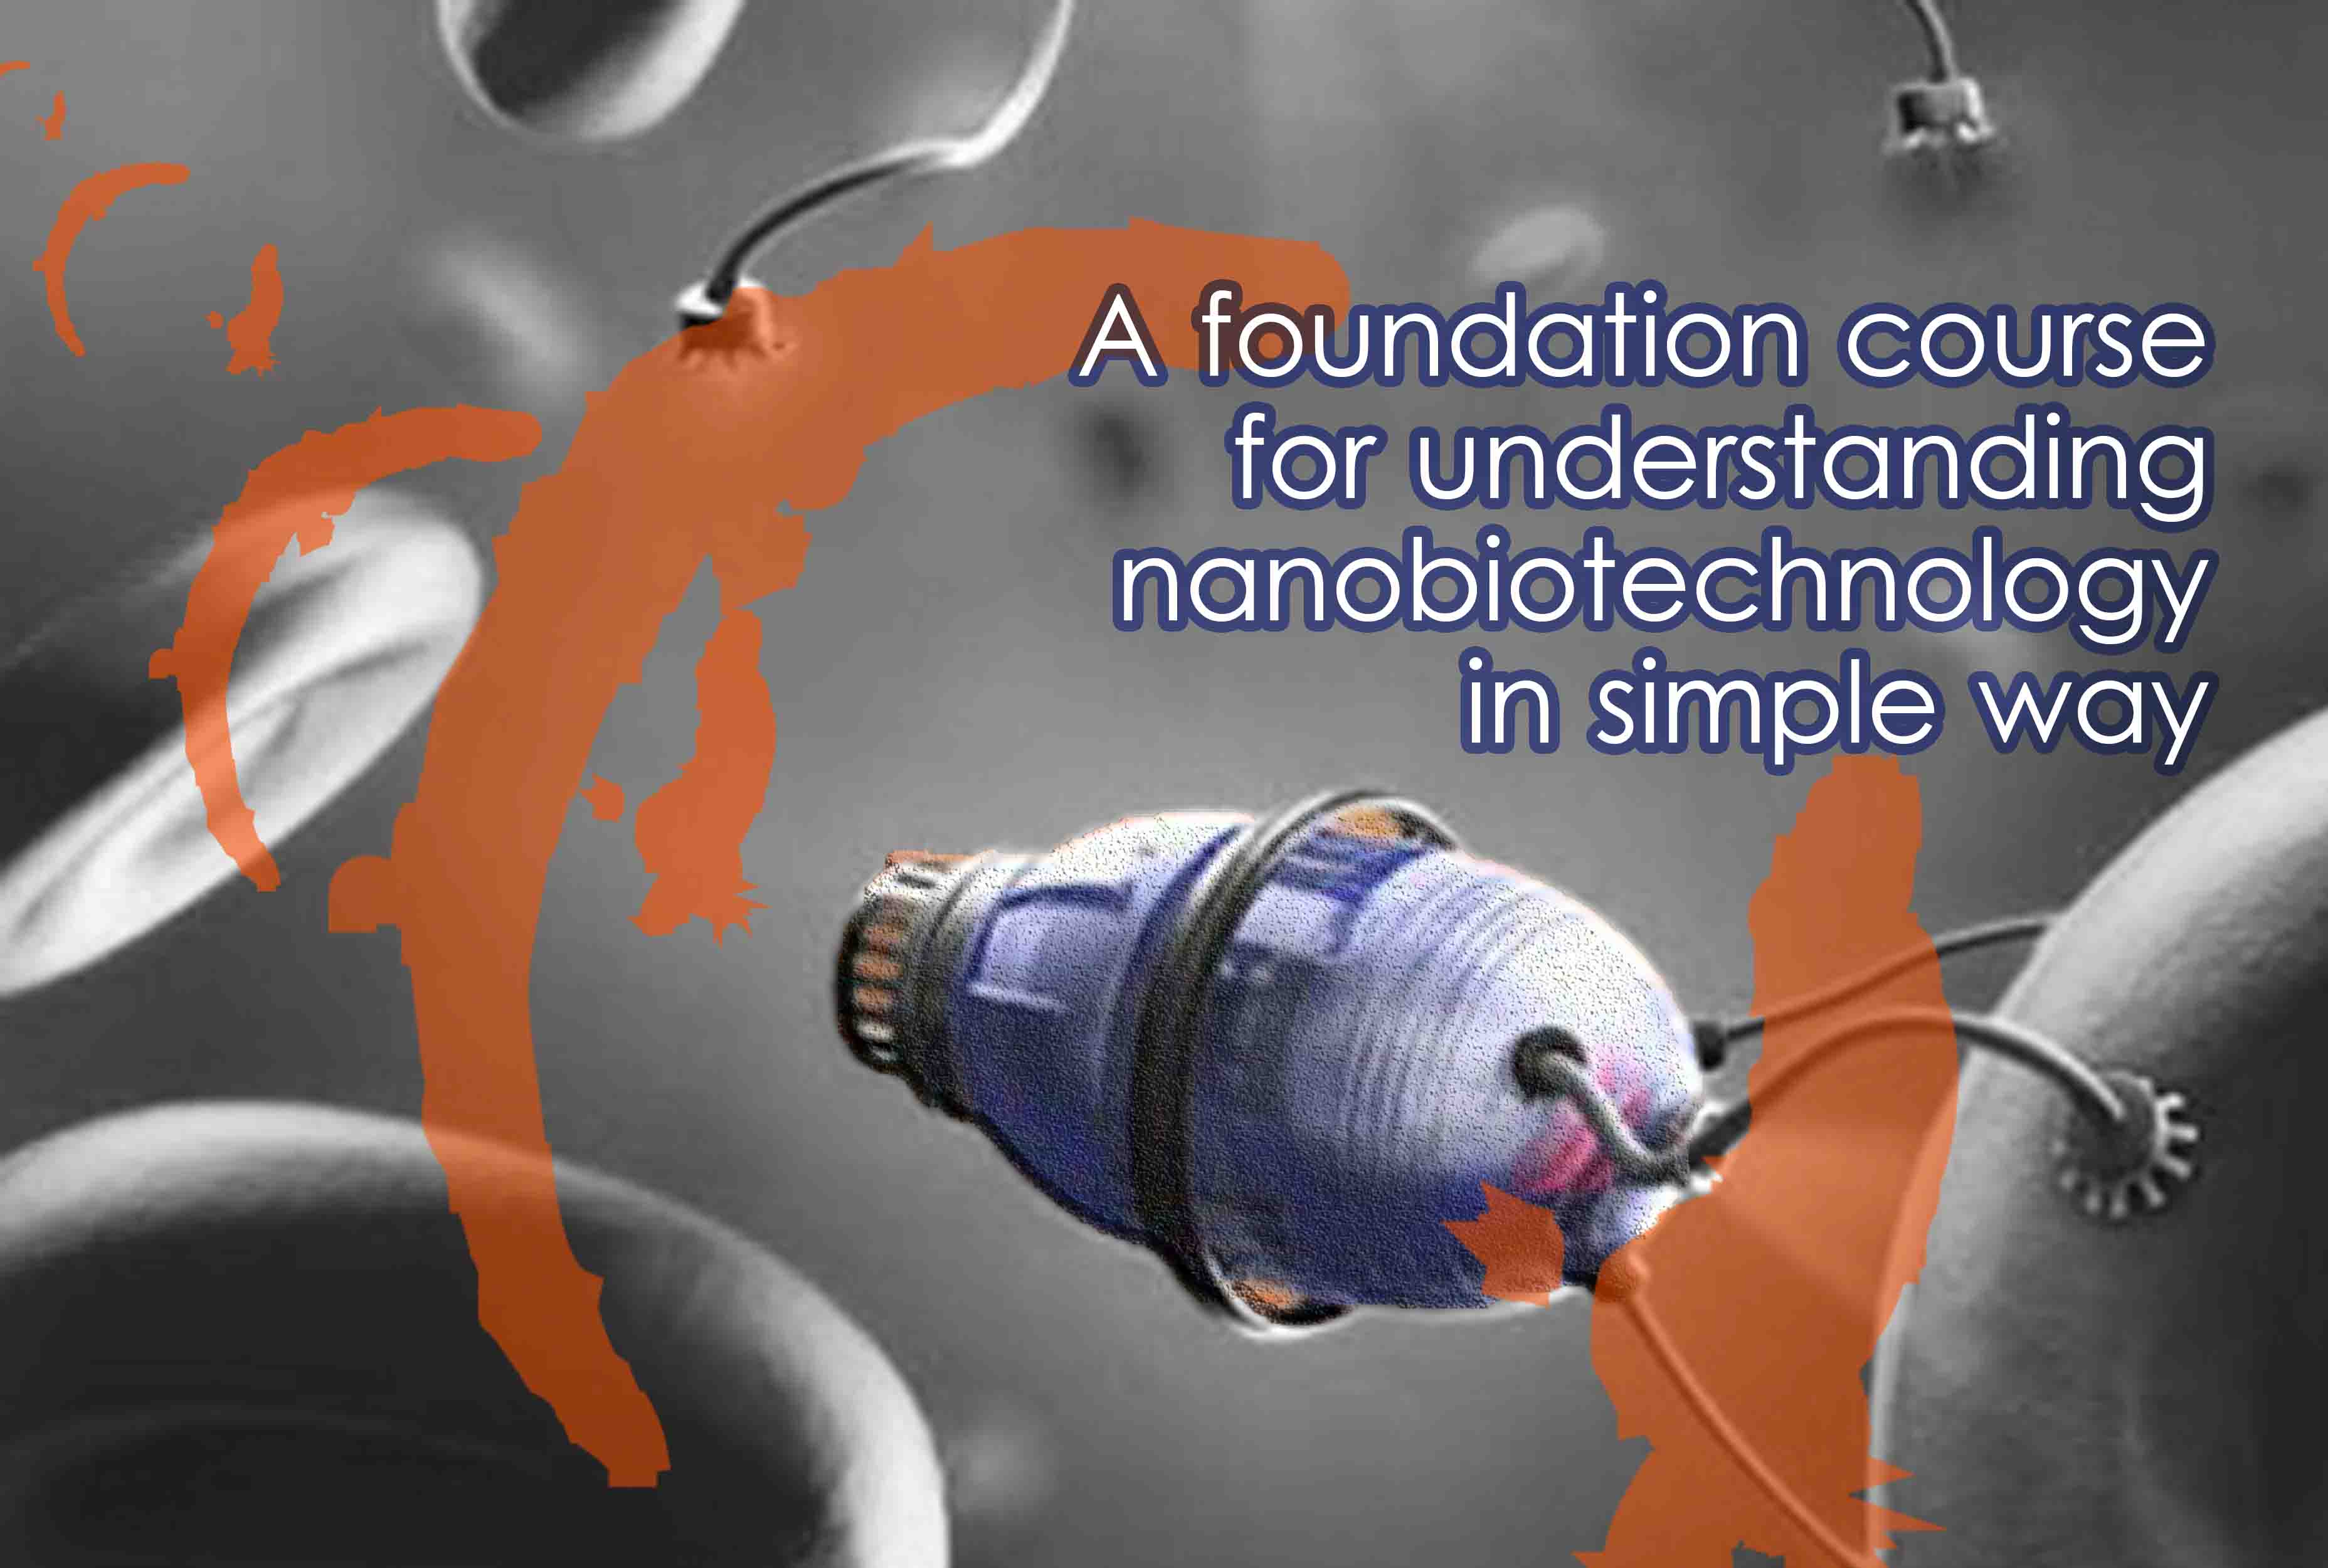 Certificate course on nanobiotechnology